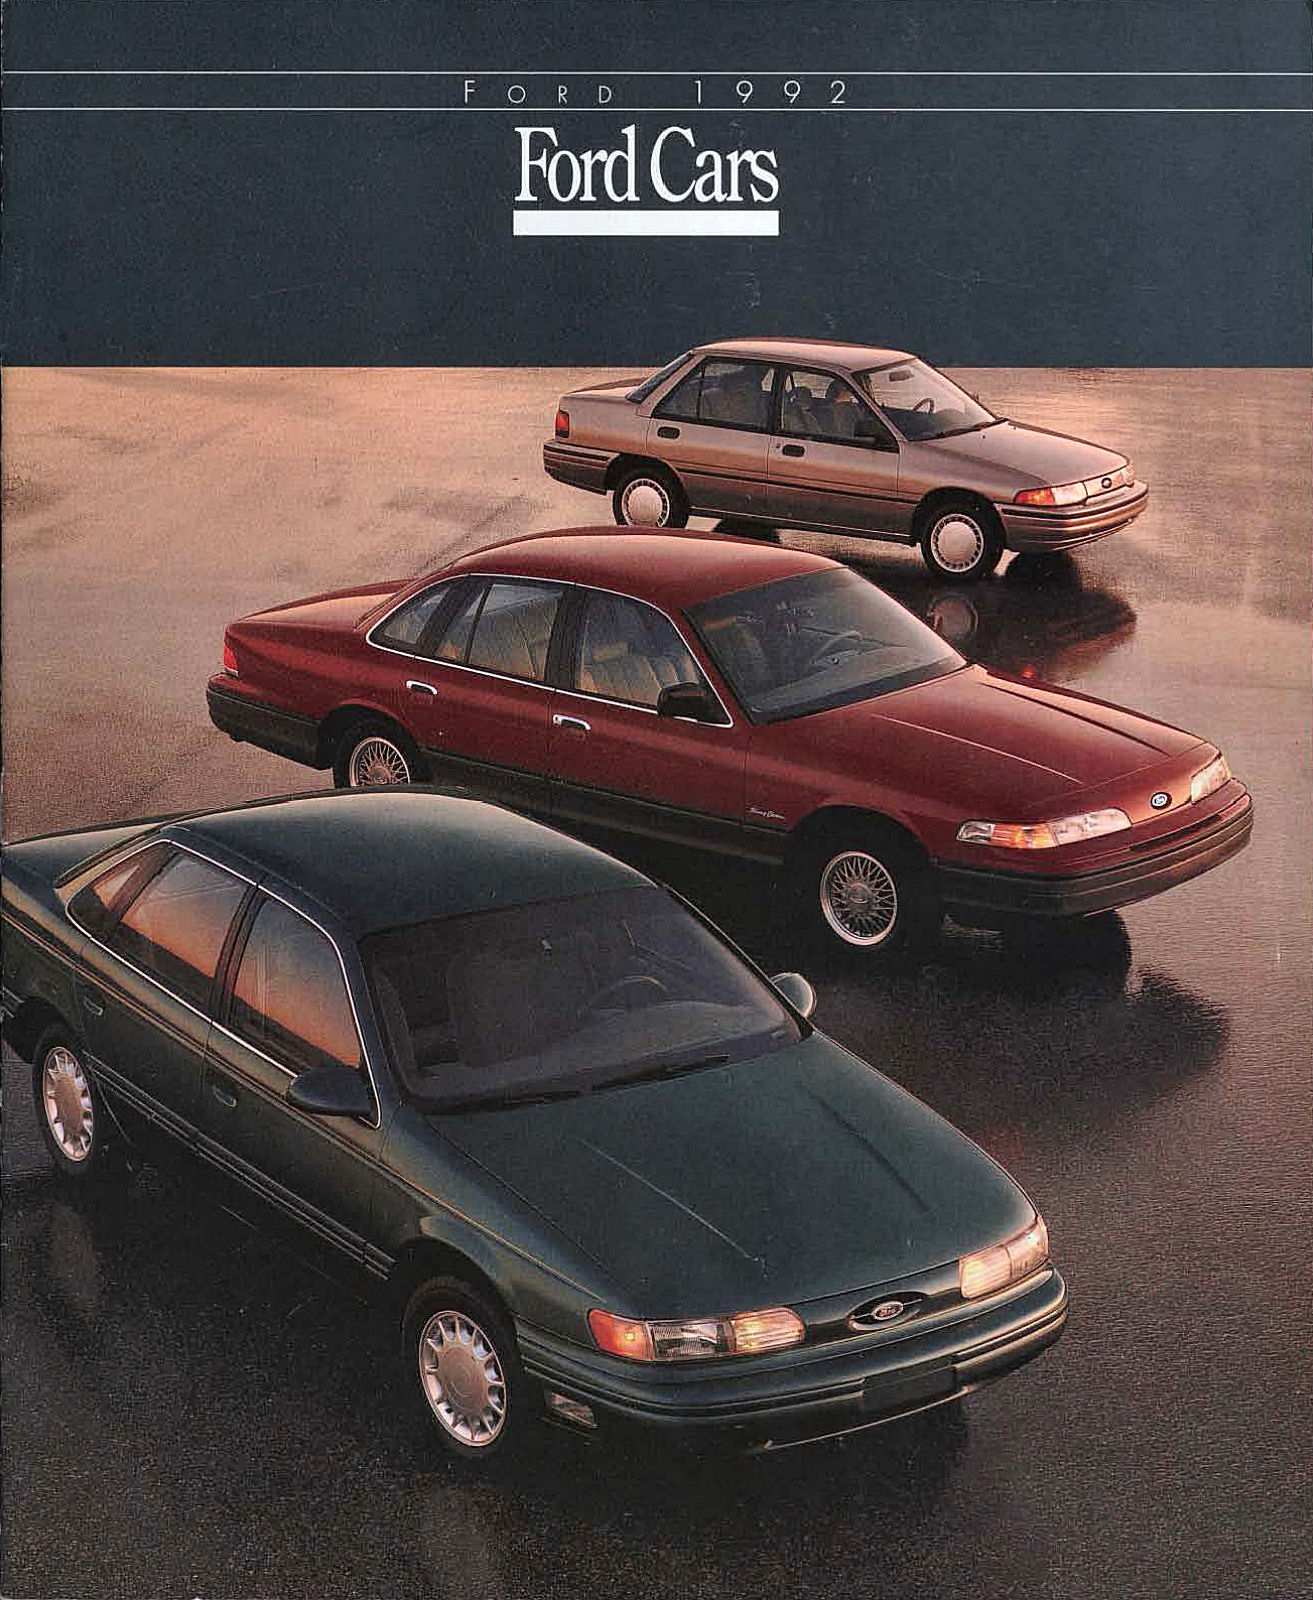 1992 Ford Cars-01